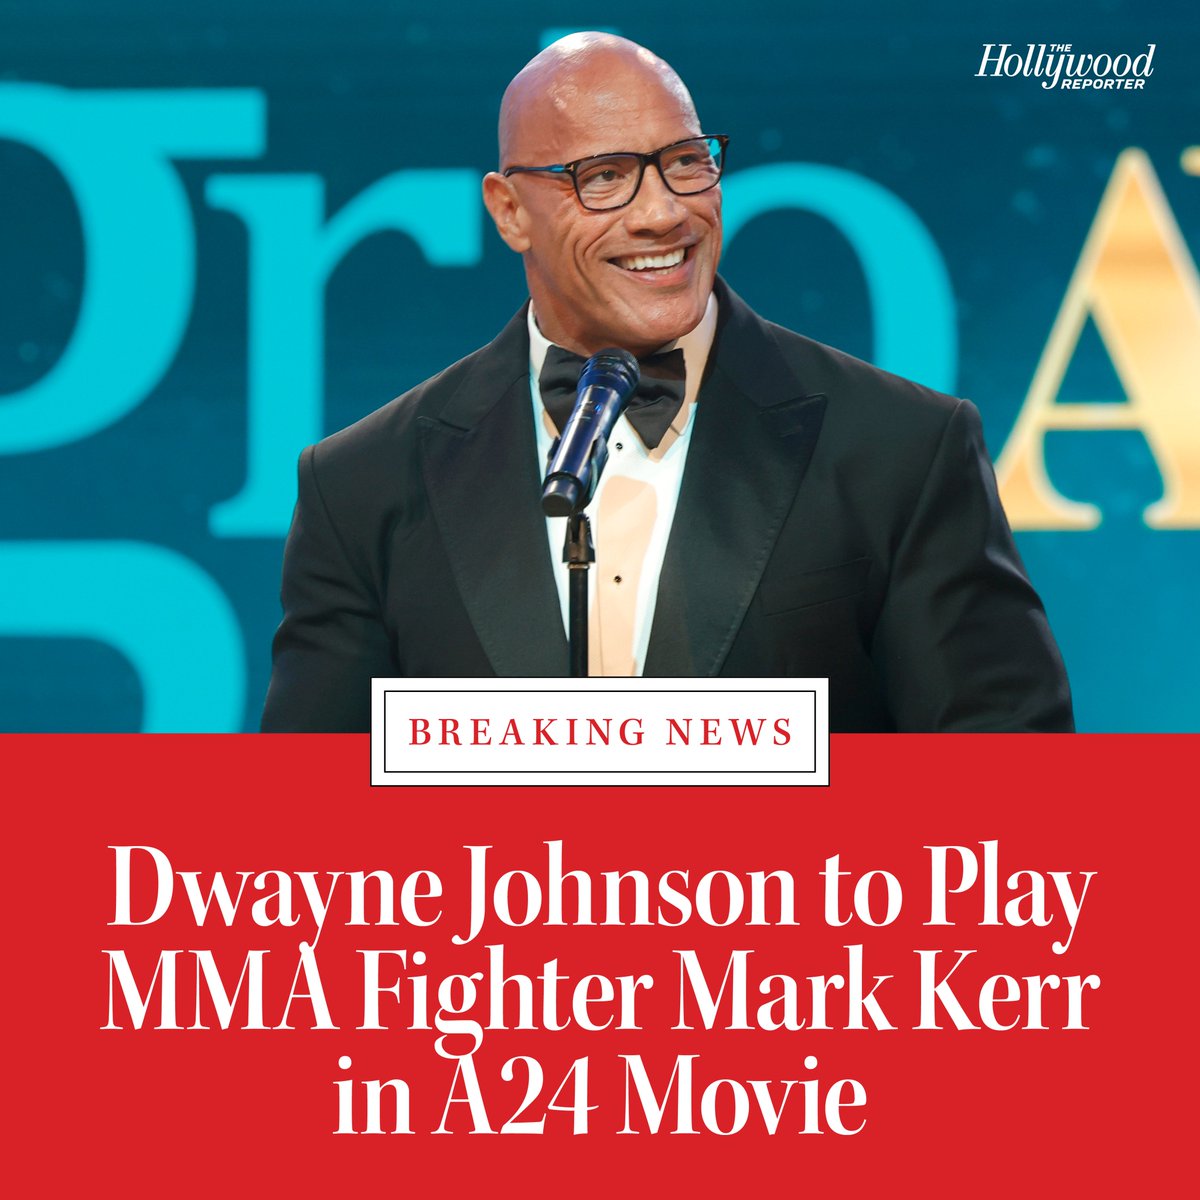 Dwayne @TheRock Johnson will be taking his most dramatic role to date in a new A24 project from one half of the 'Uncut Gems' team, Benny Safdie. He will play Mark Kerr in #TheSmashingMachine: thr.cm/xueIole